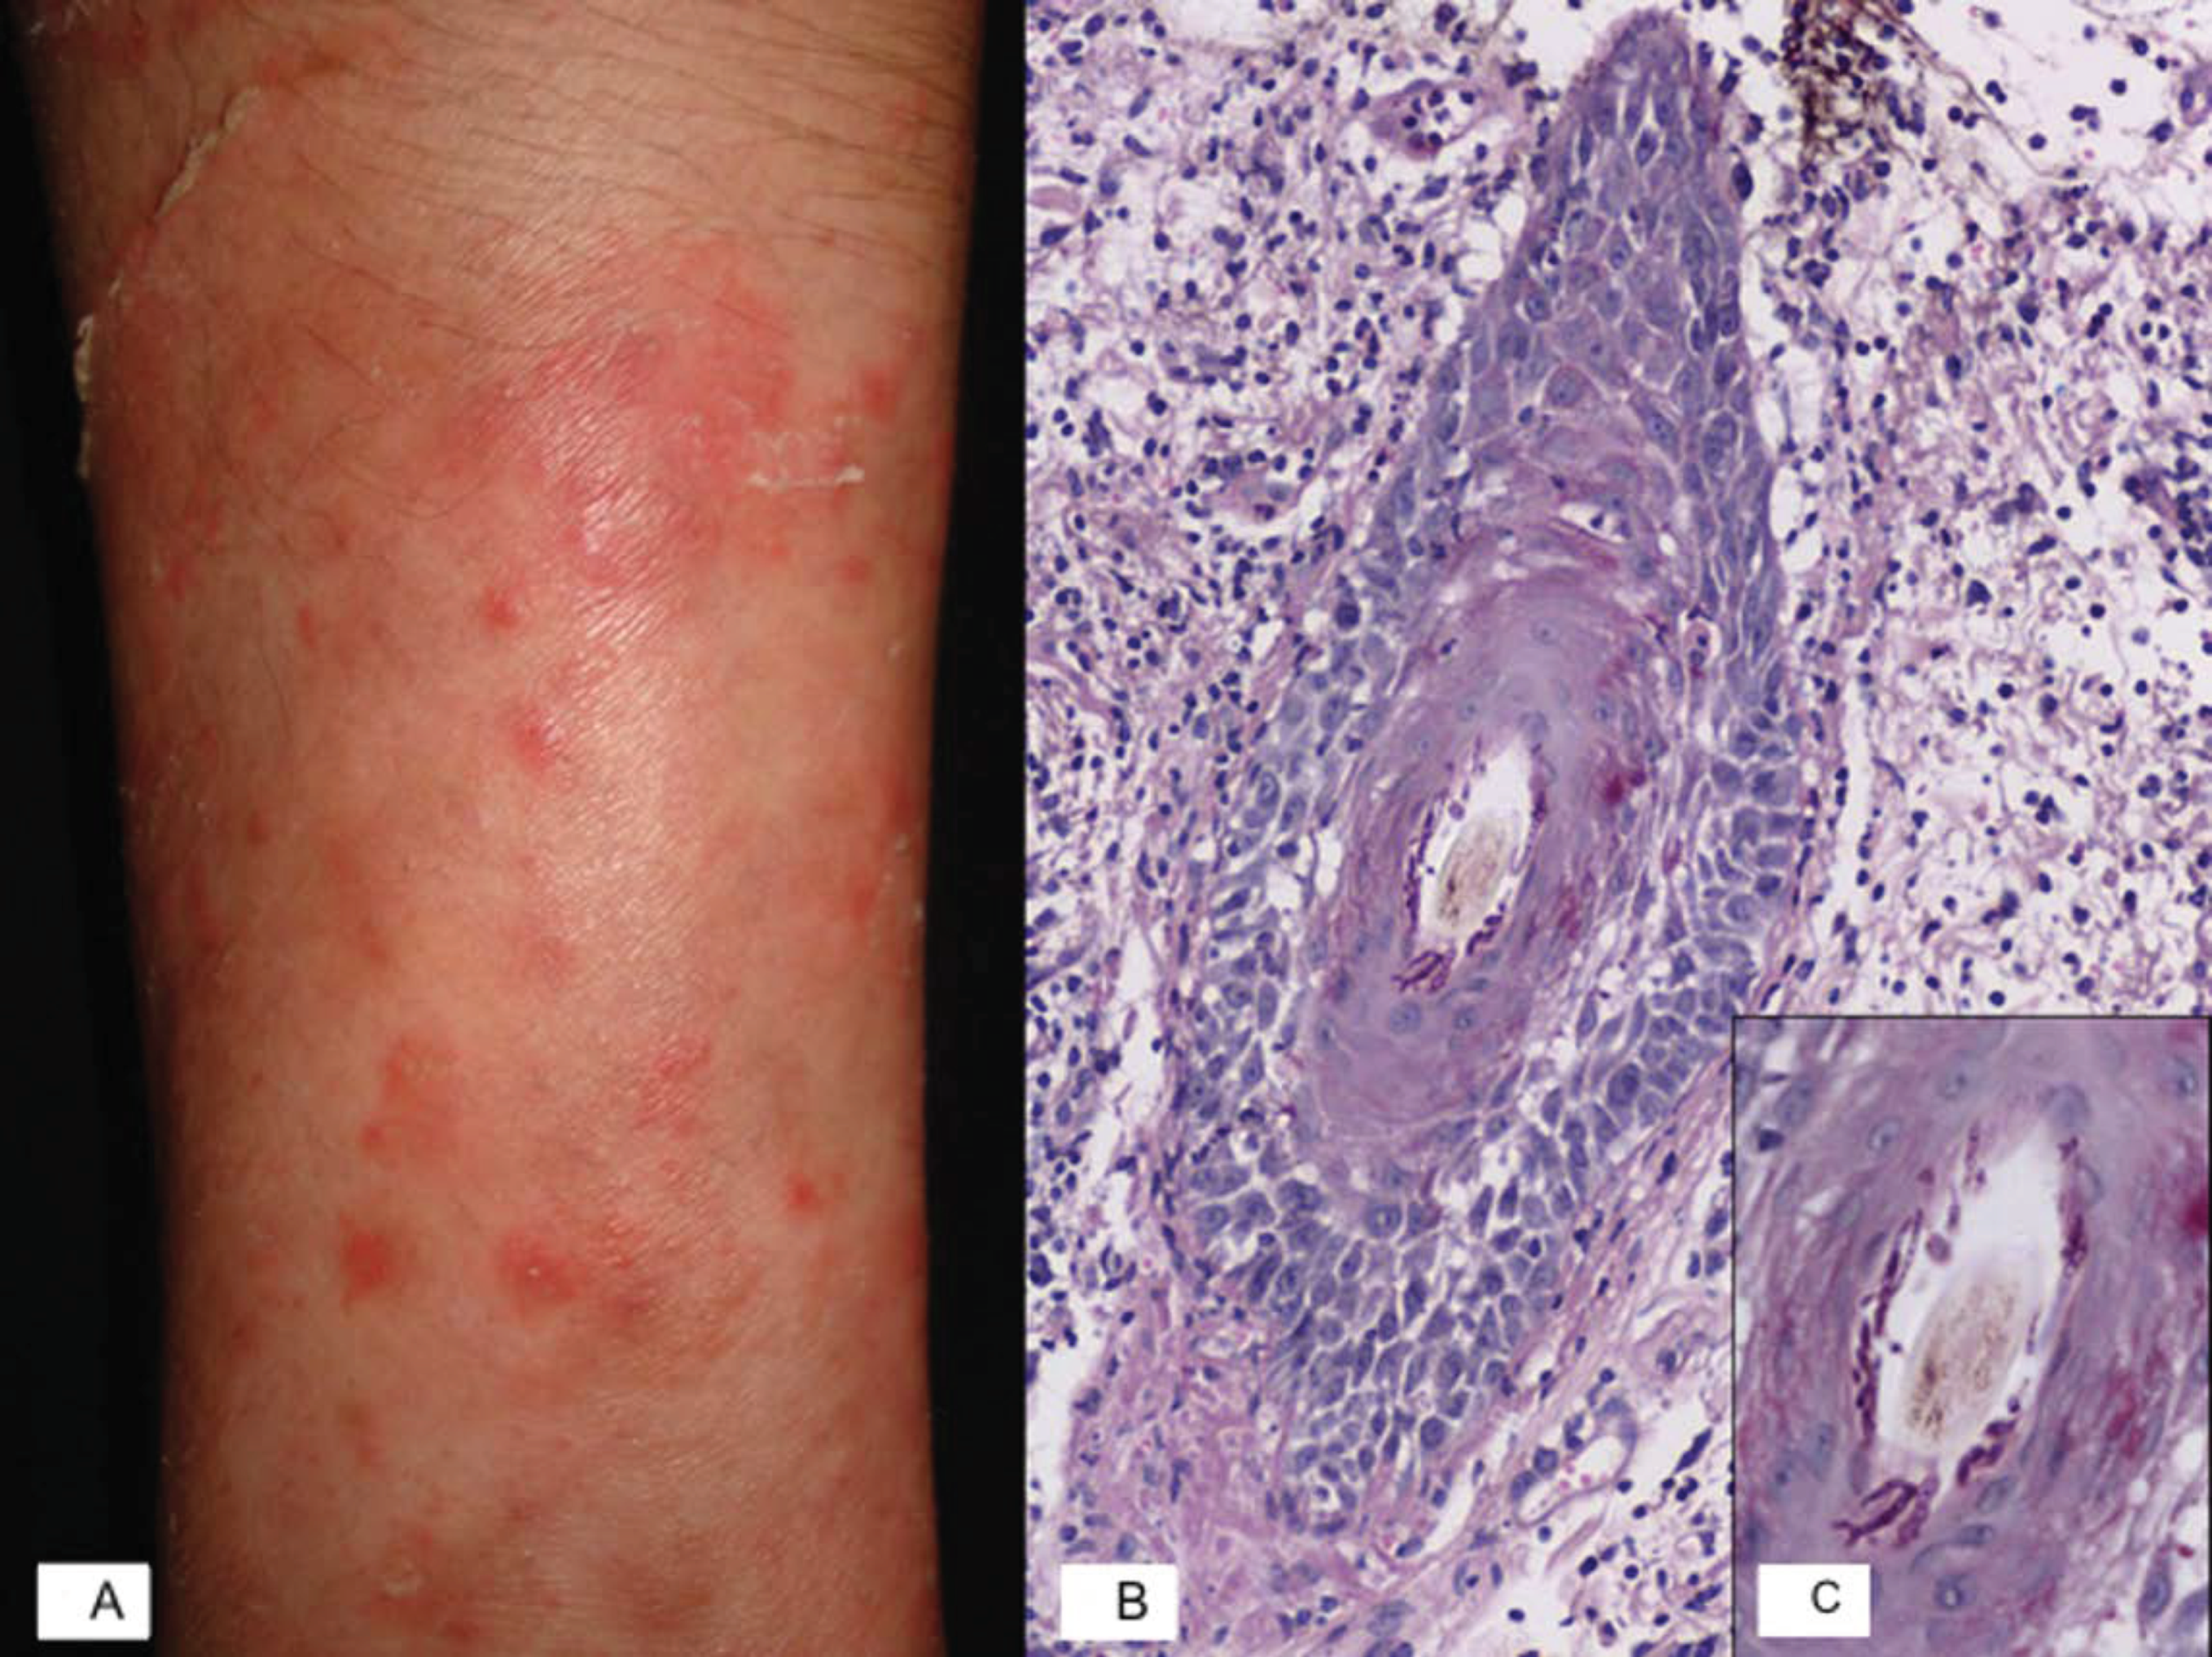 Tinea manuum caused by Microsporum canis. The patient presented with a